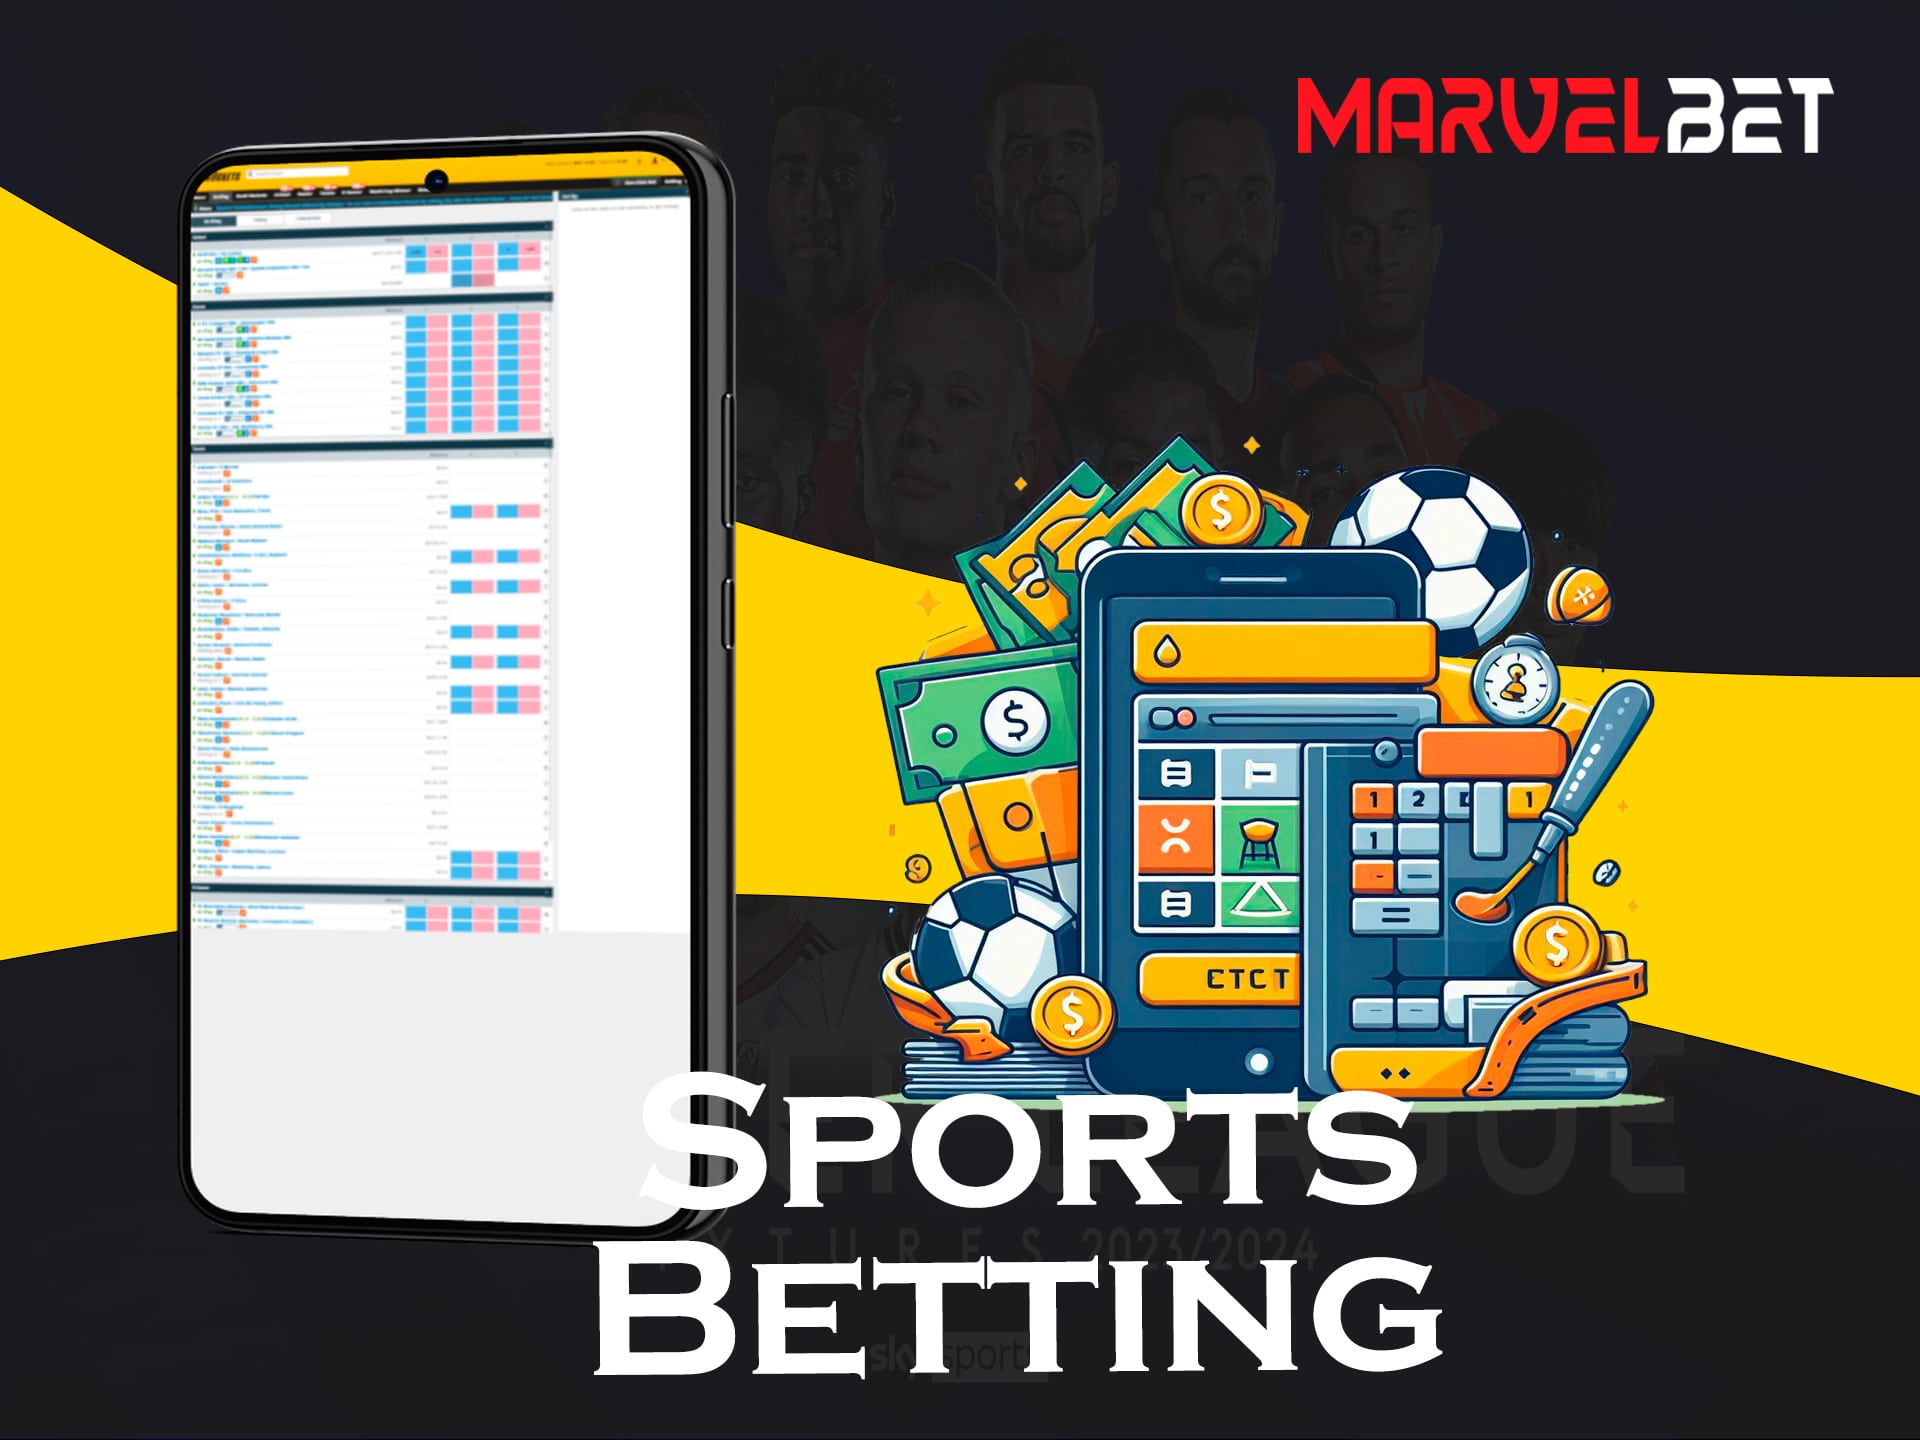 sports betting in marvelbet apps 